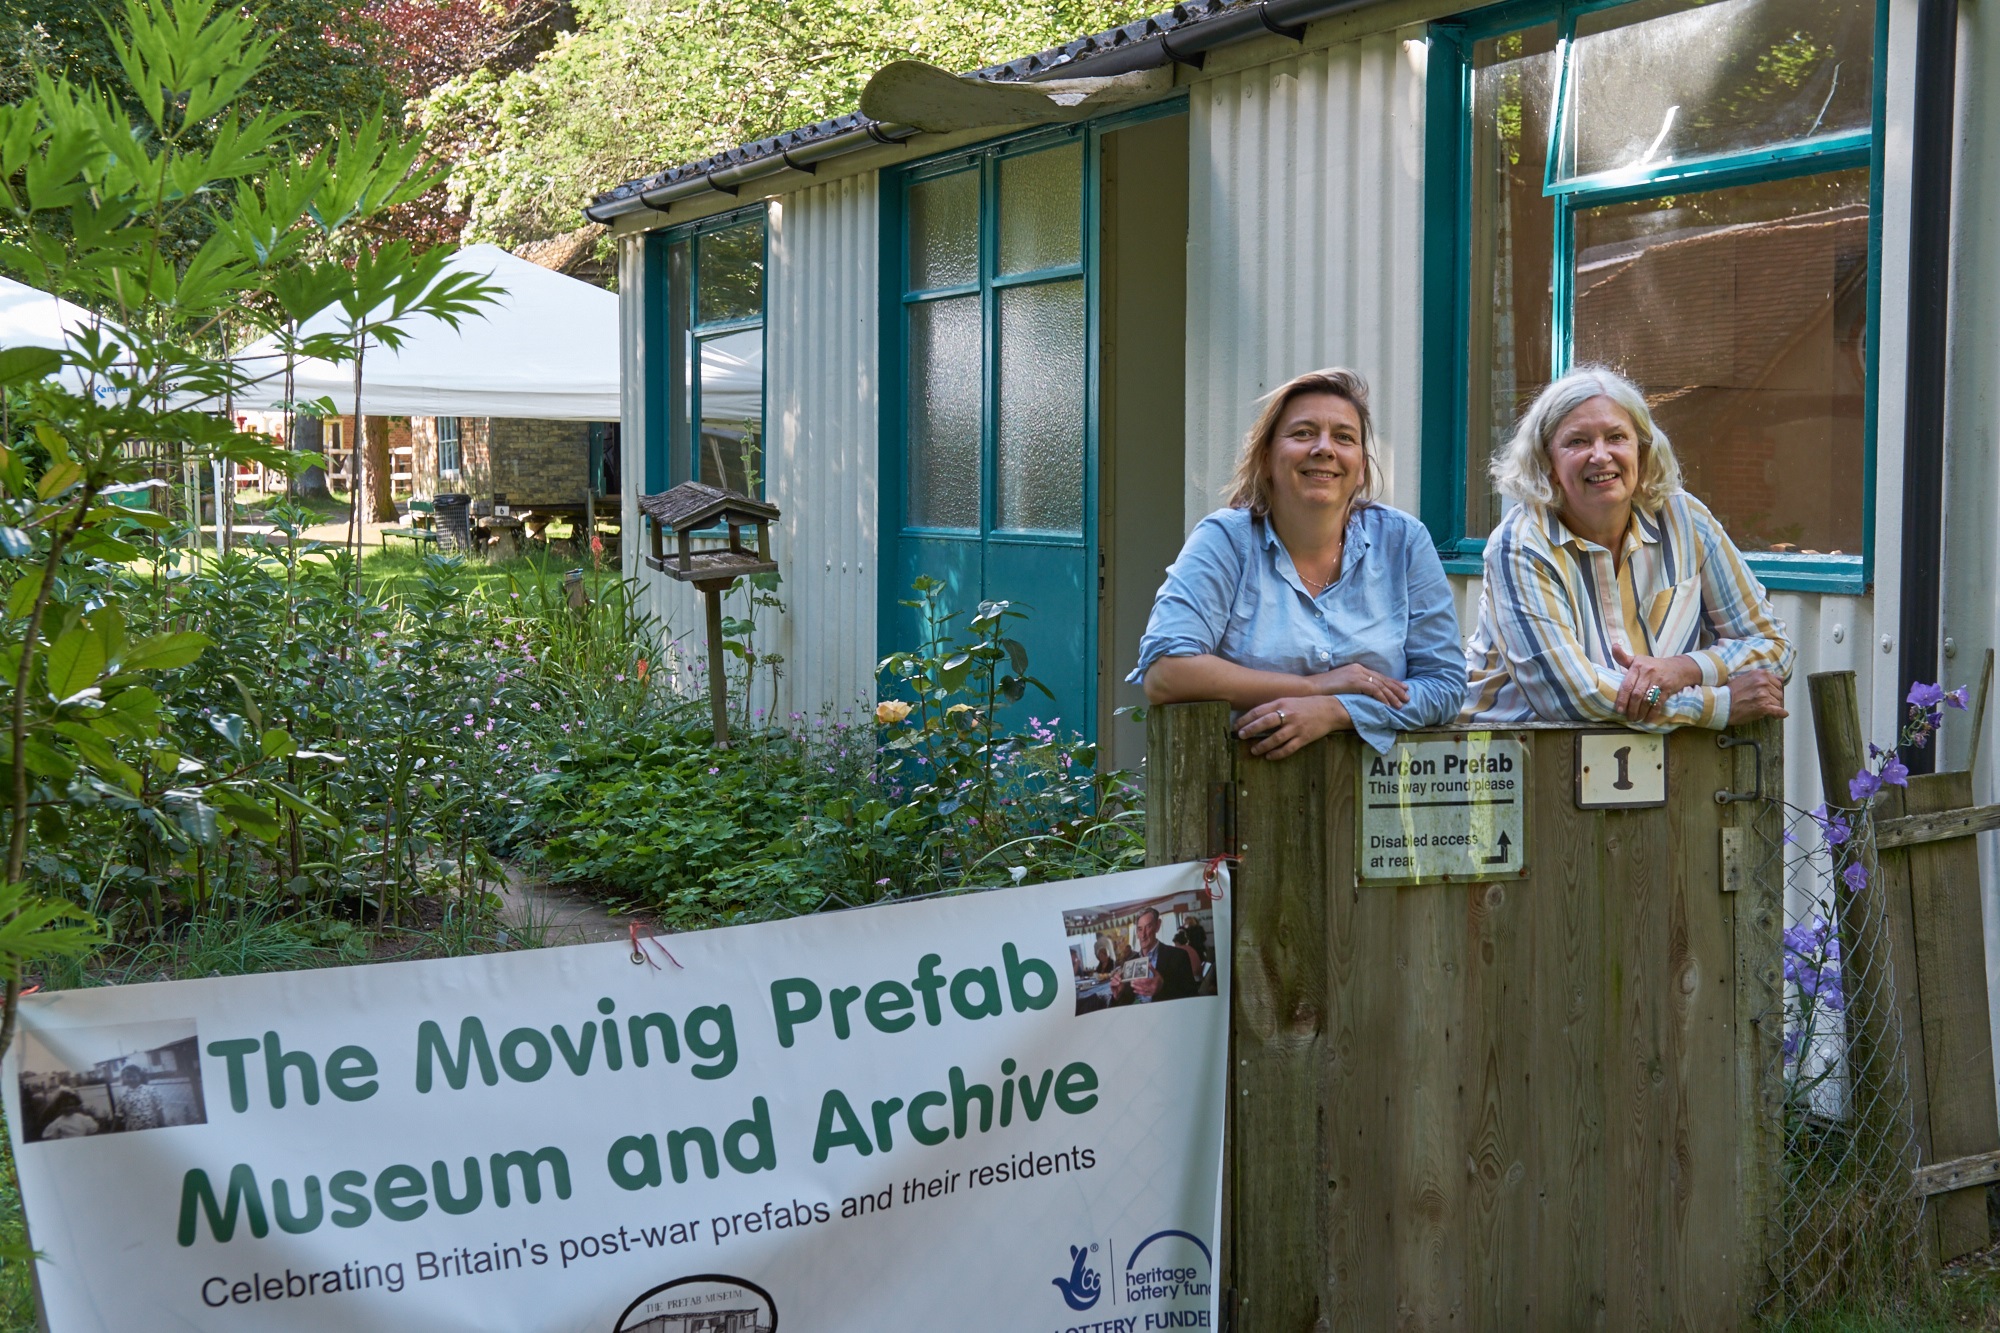 Moving Prefab event: Rural Life Centre. 3 July 2016